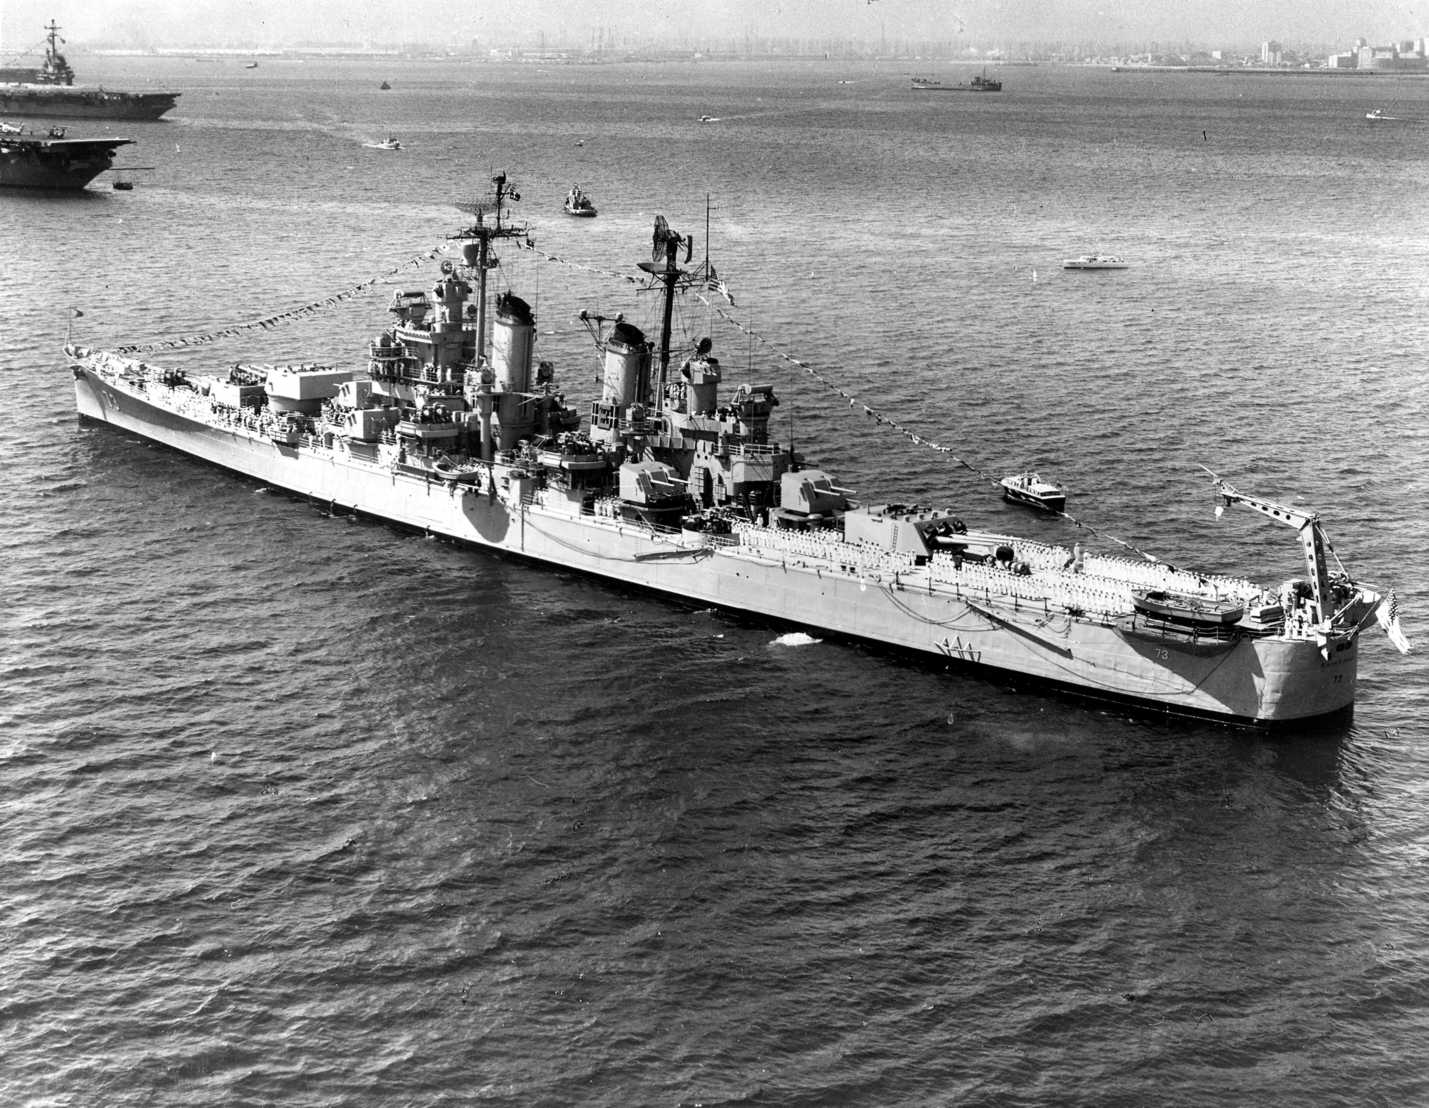 USS Saint Paul, USS Bennington, and another carrier at the First Fleet Review, Long Beach Harbor, California, United States, 14 Sep 1956